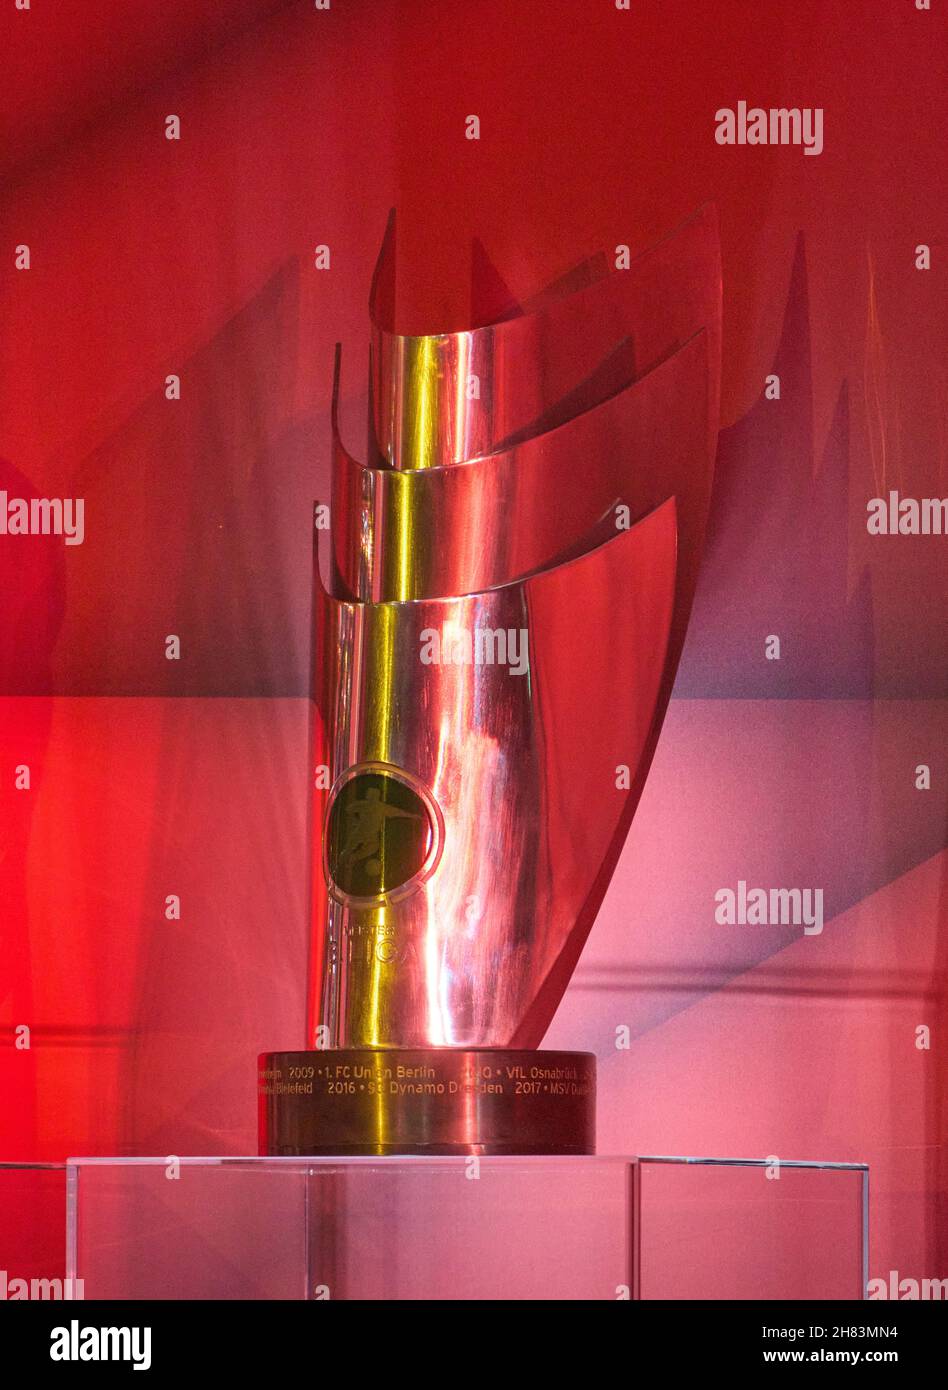 All important trophies: Pokal Meister 3.Liga FCBII at the annual general Meeting of  FC BAYERN MÜNCHEN in Audi Dome Munich, November 25, 2021,  Season 2021/2022,  © Peter Schatz / Alamy Live News Stock Photo